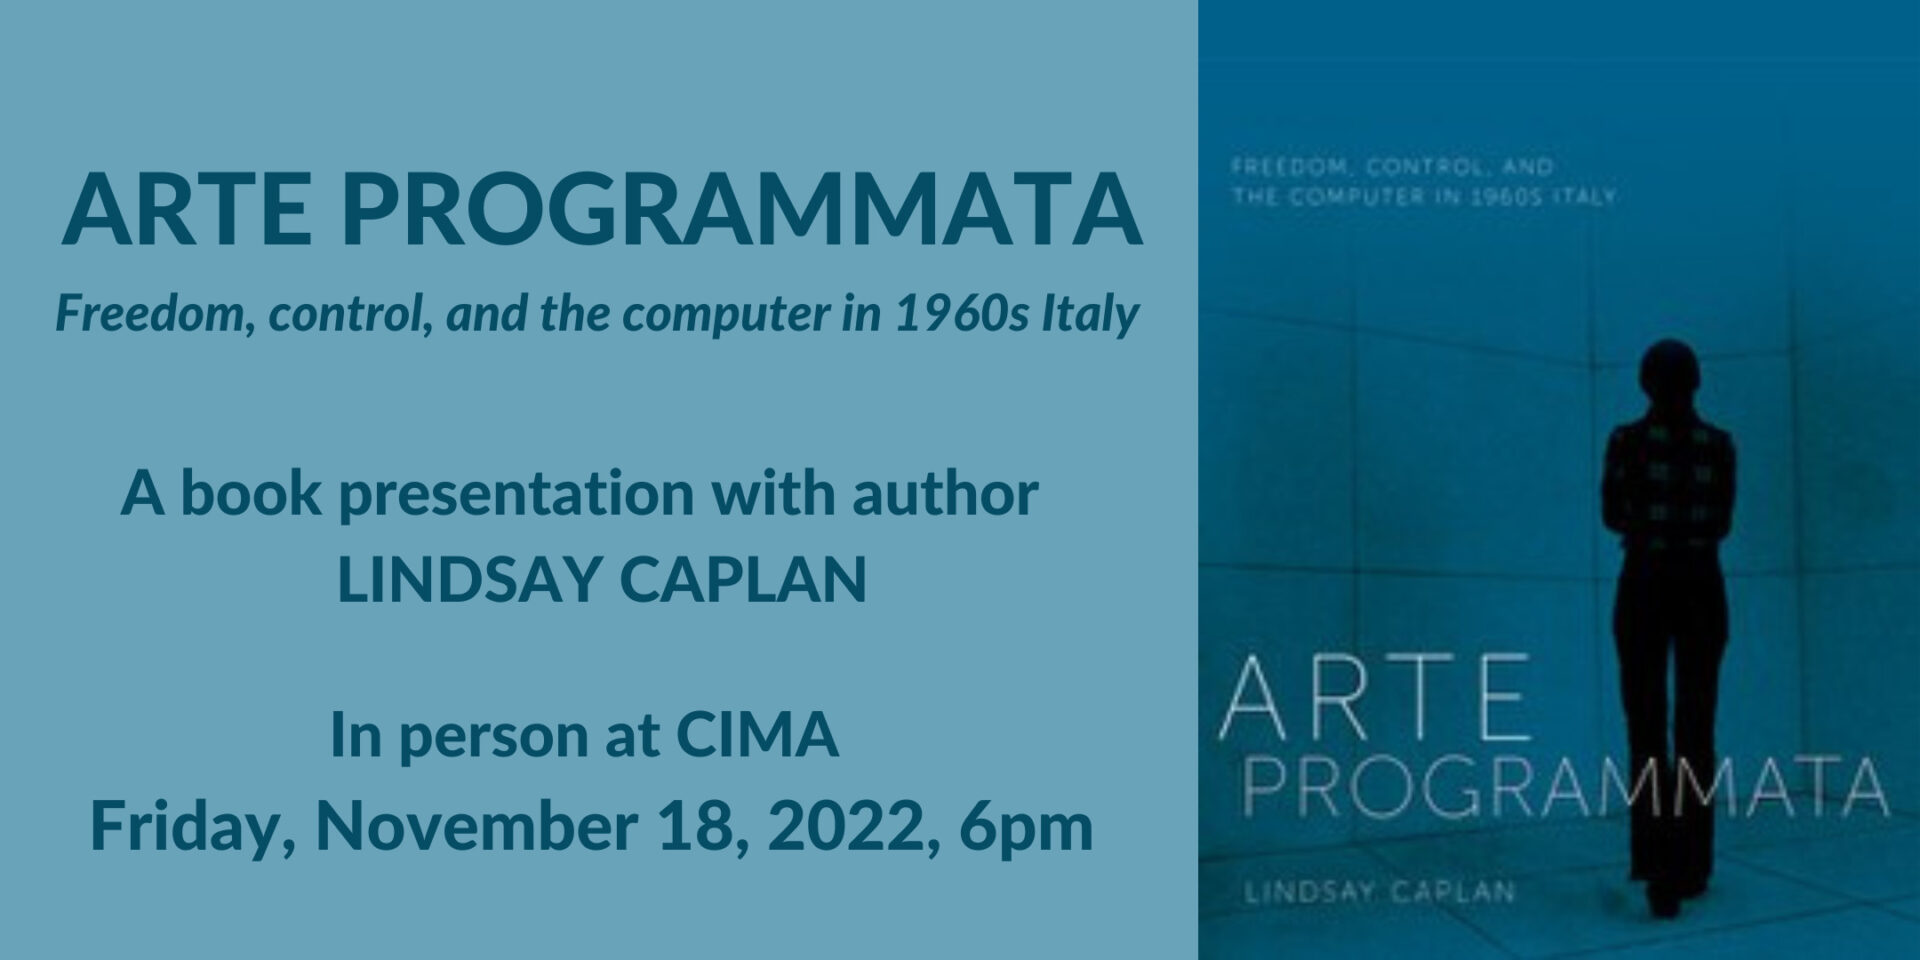 Arte Programmata: Freedom, Control, and the Computer in 1960s Italy. A book presentation with author Lindsay Caplan